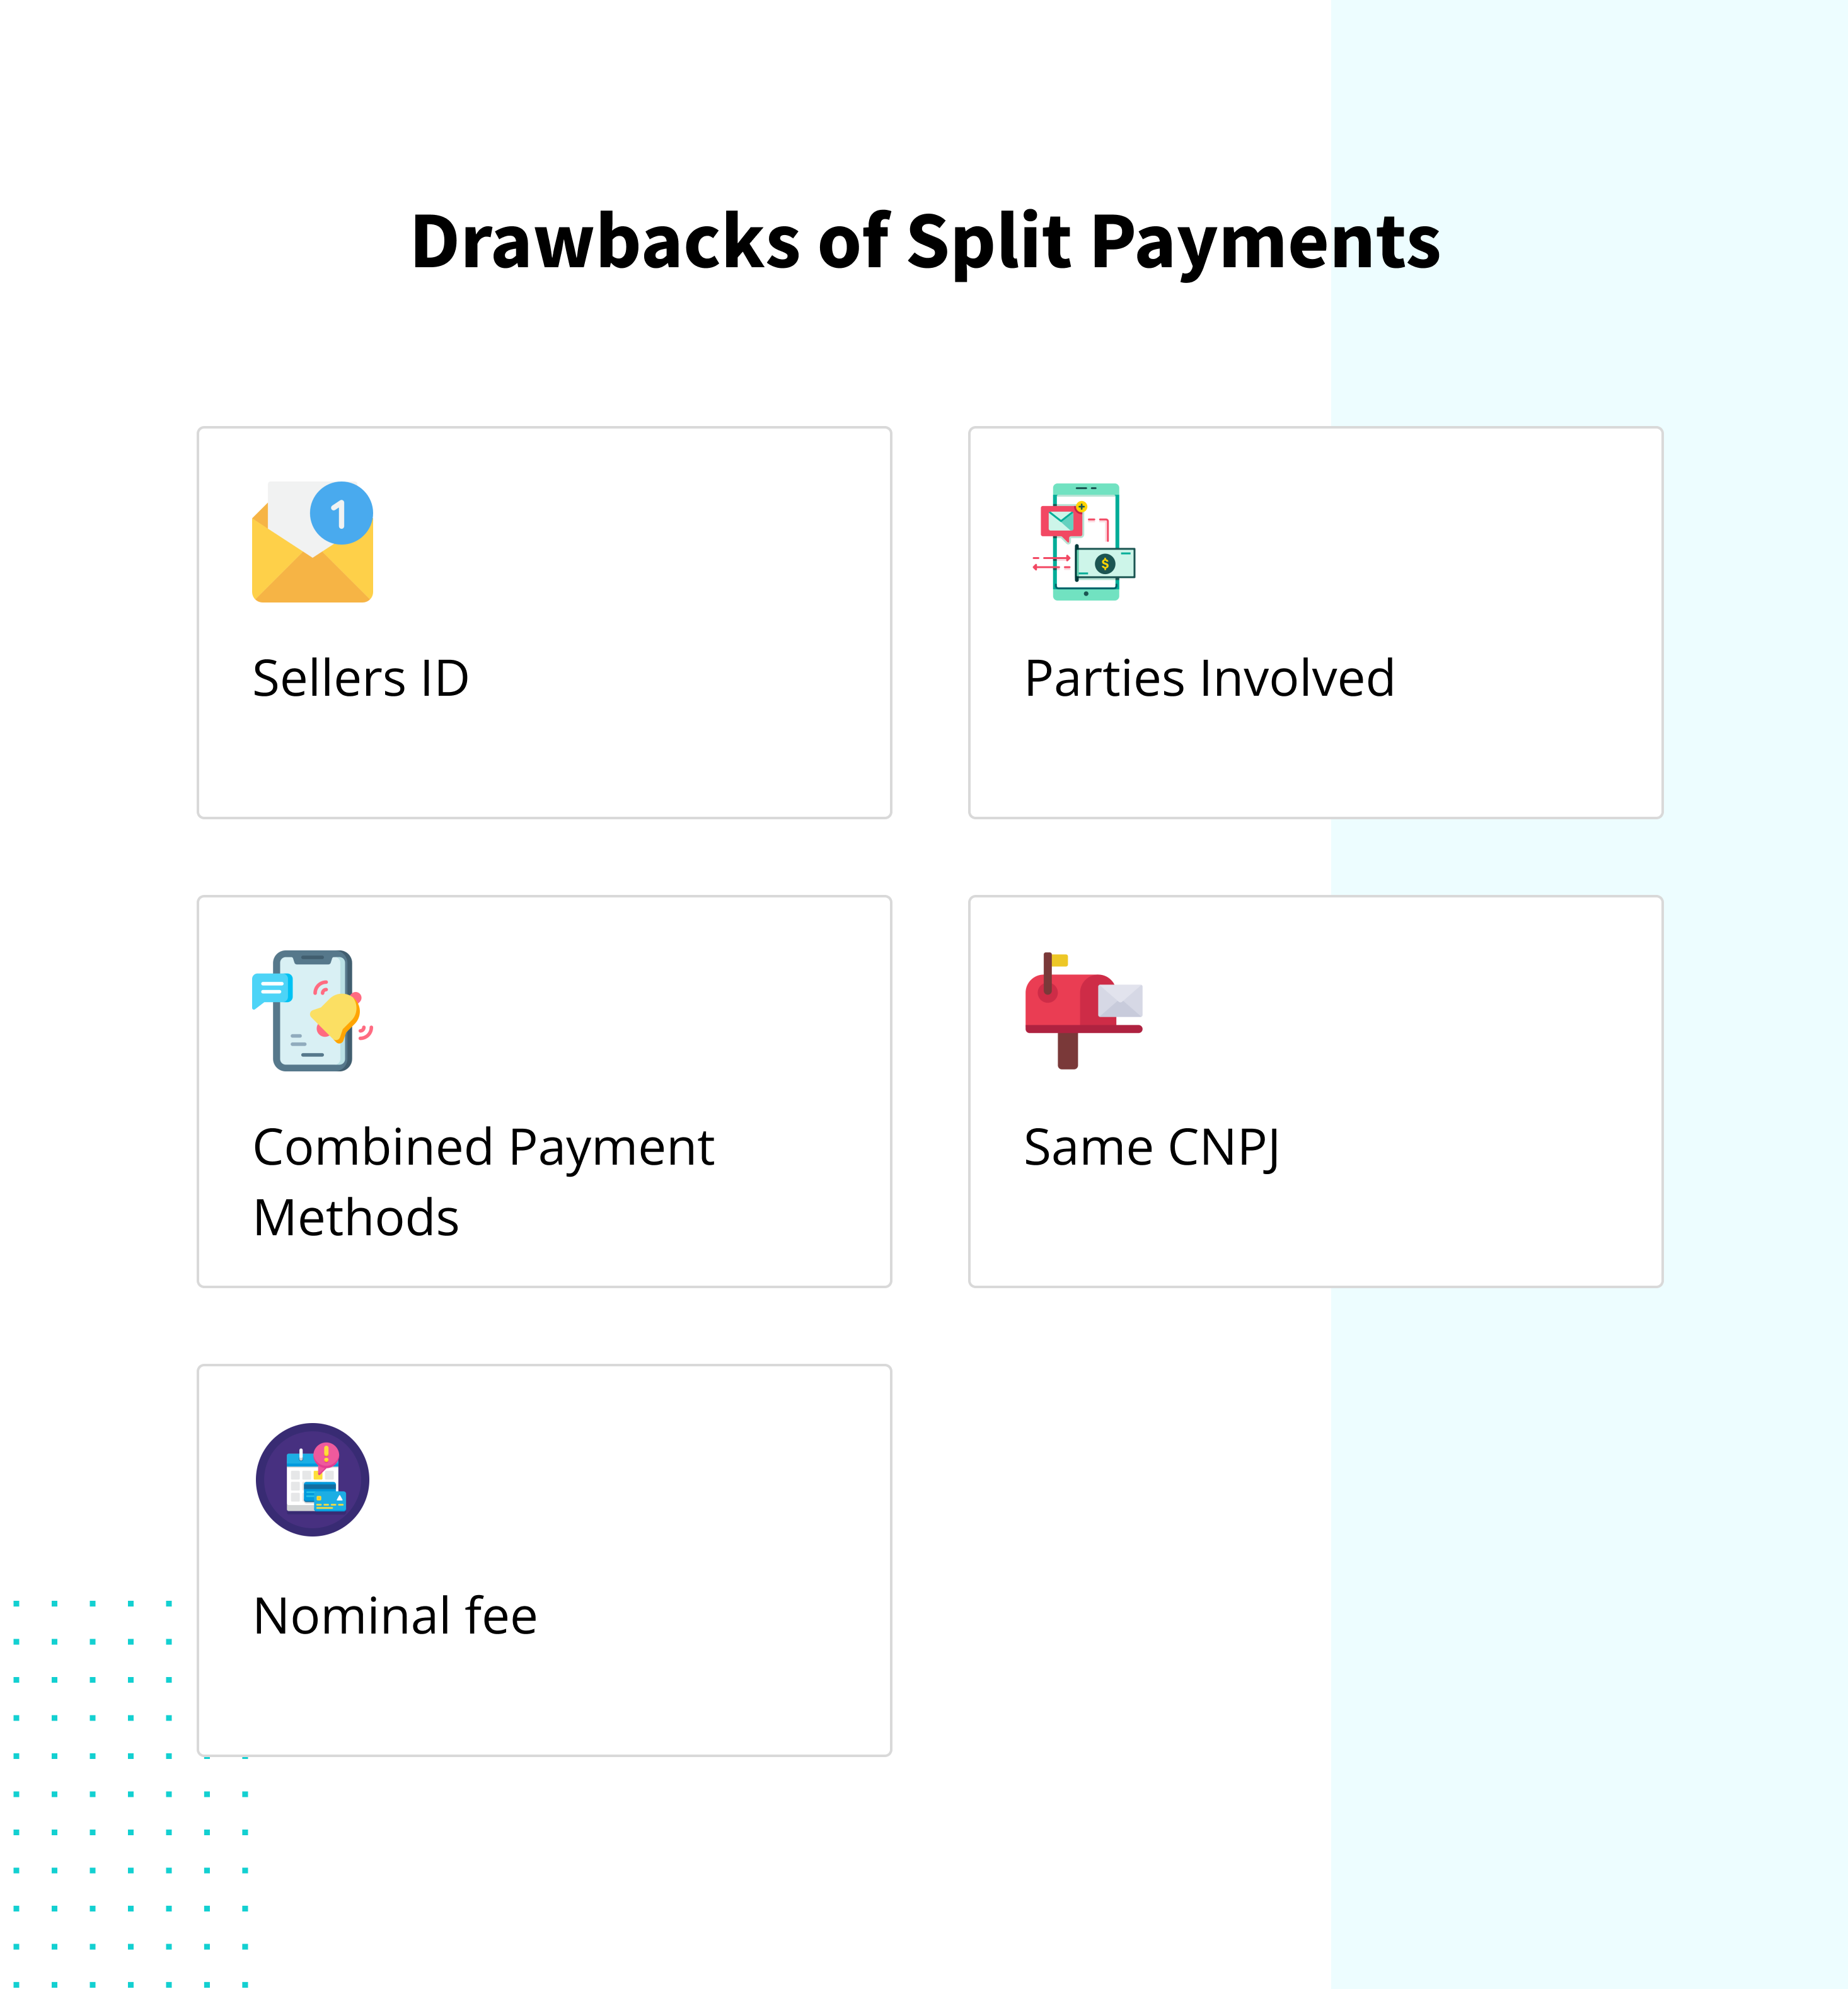 Drawback of split payments